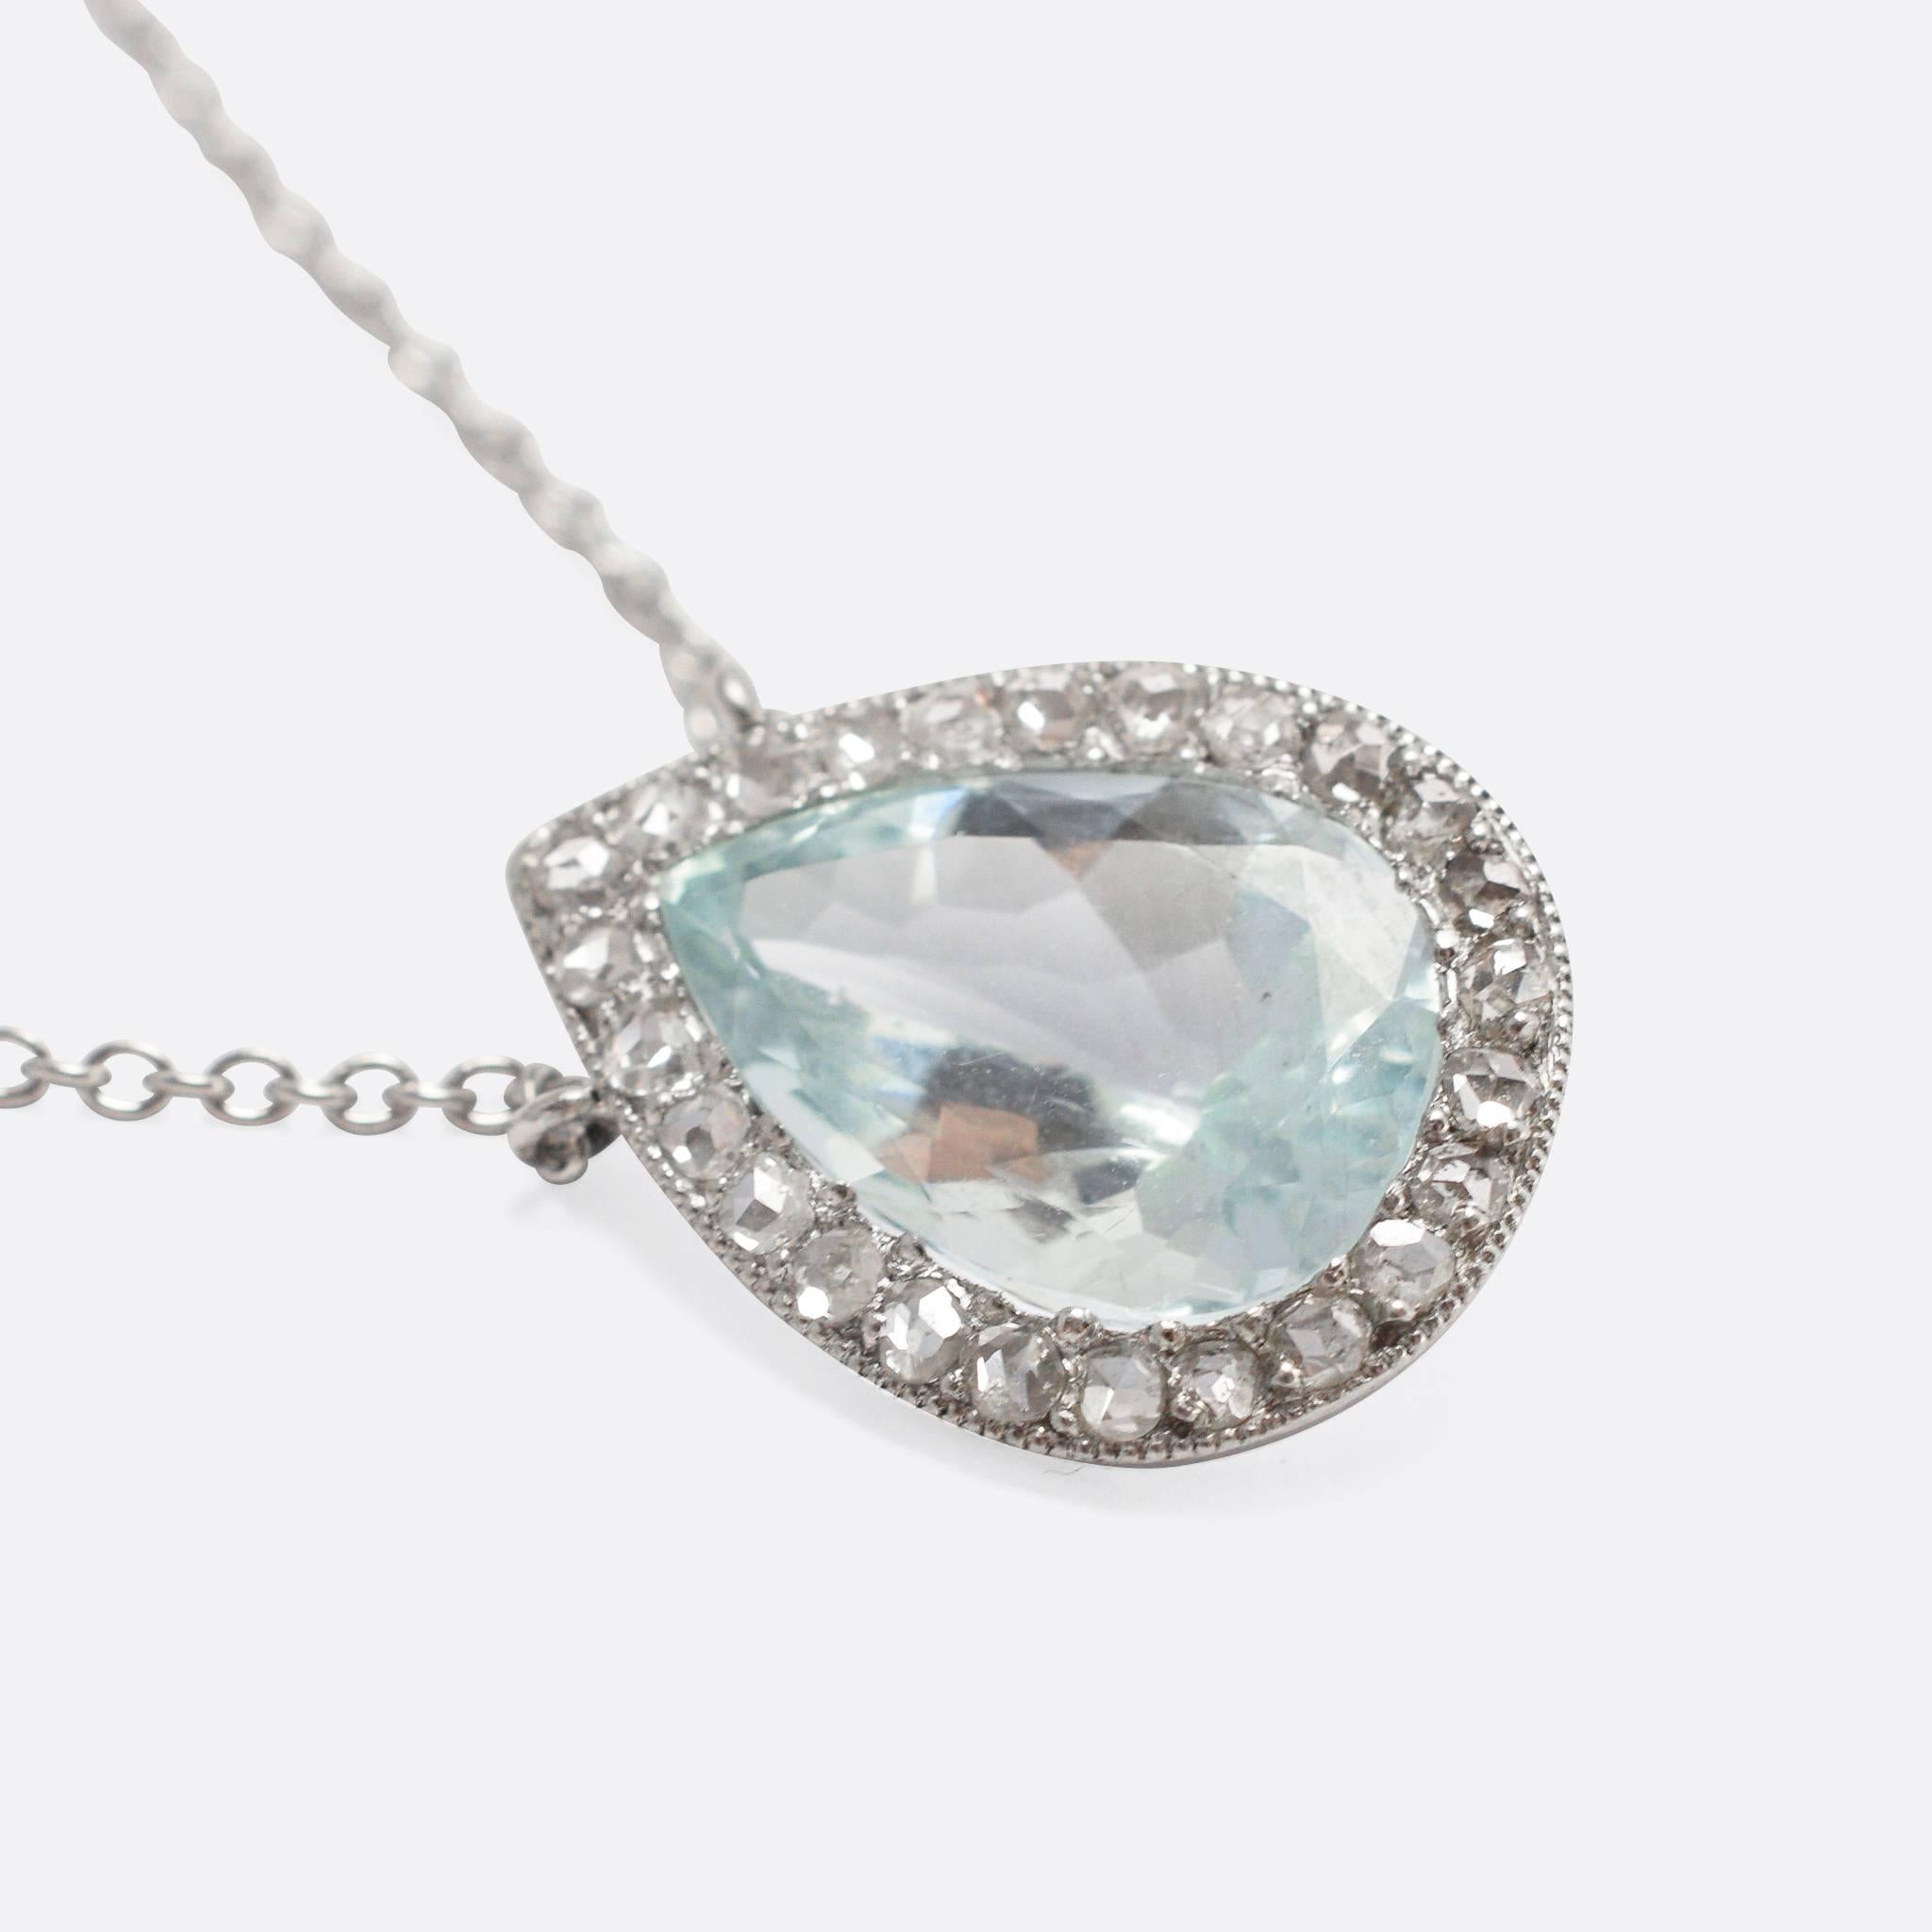 A sublime antique pendant, set with a pear cut aquamarine within a halo of diamonds. The settings are finished in fine millegrain detailing, and the piece modelled in platinum throughout - mounted on a fine platinum chain. It's refined and